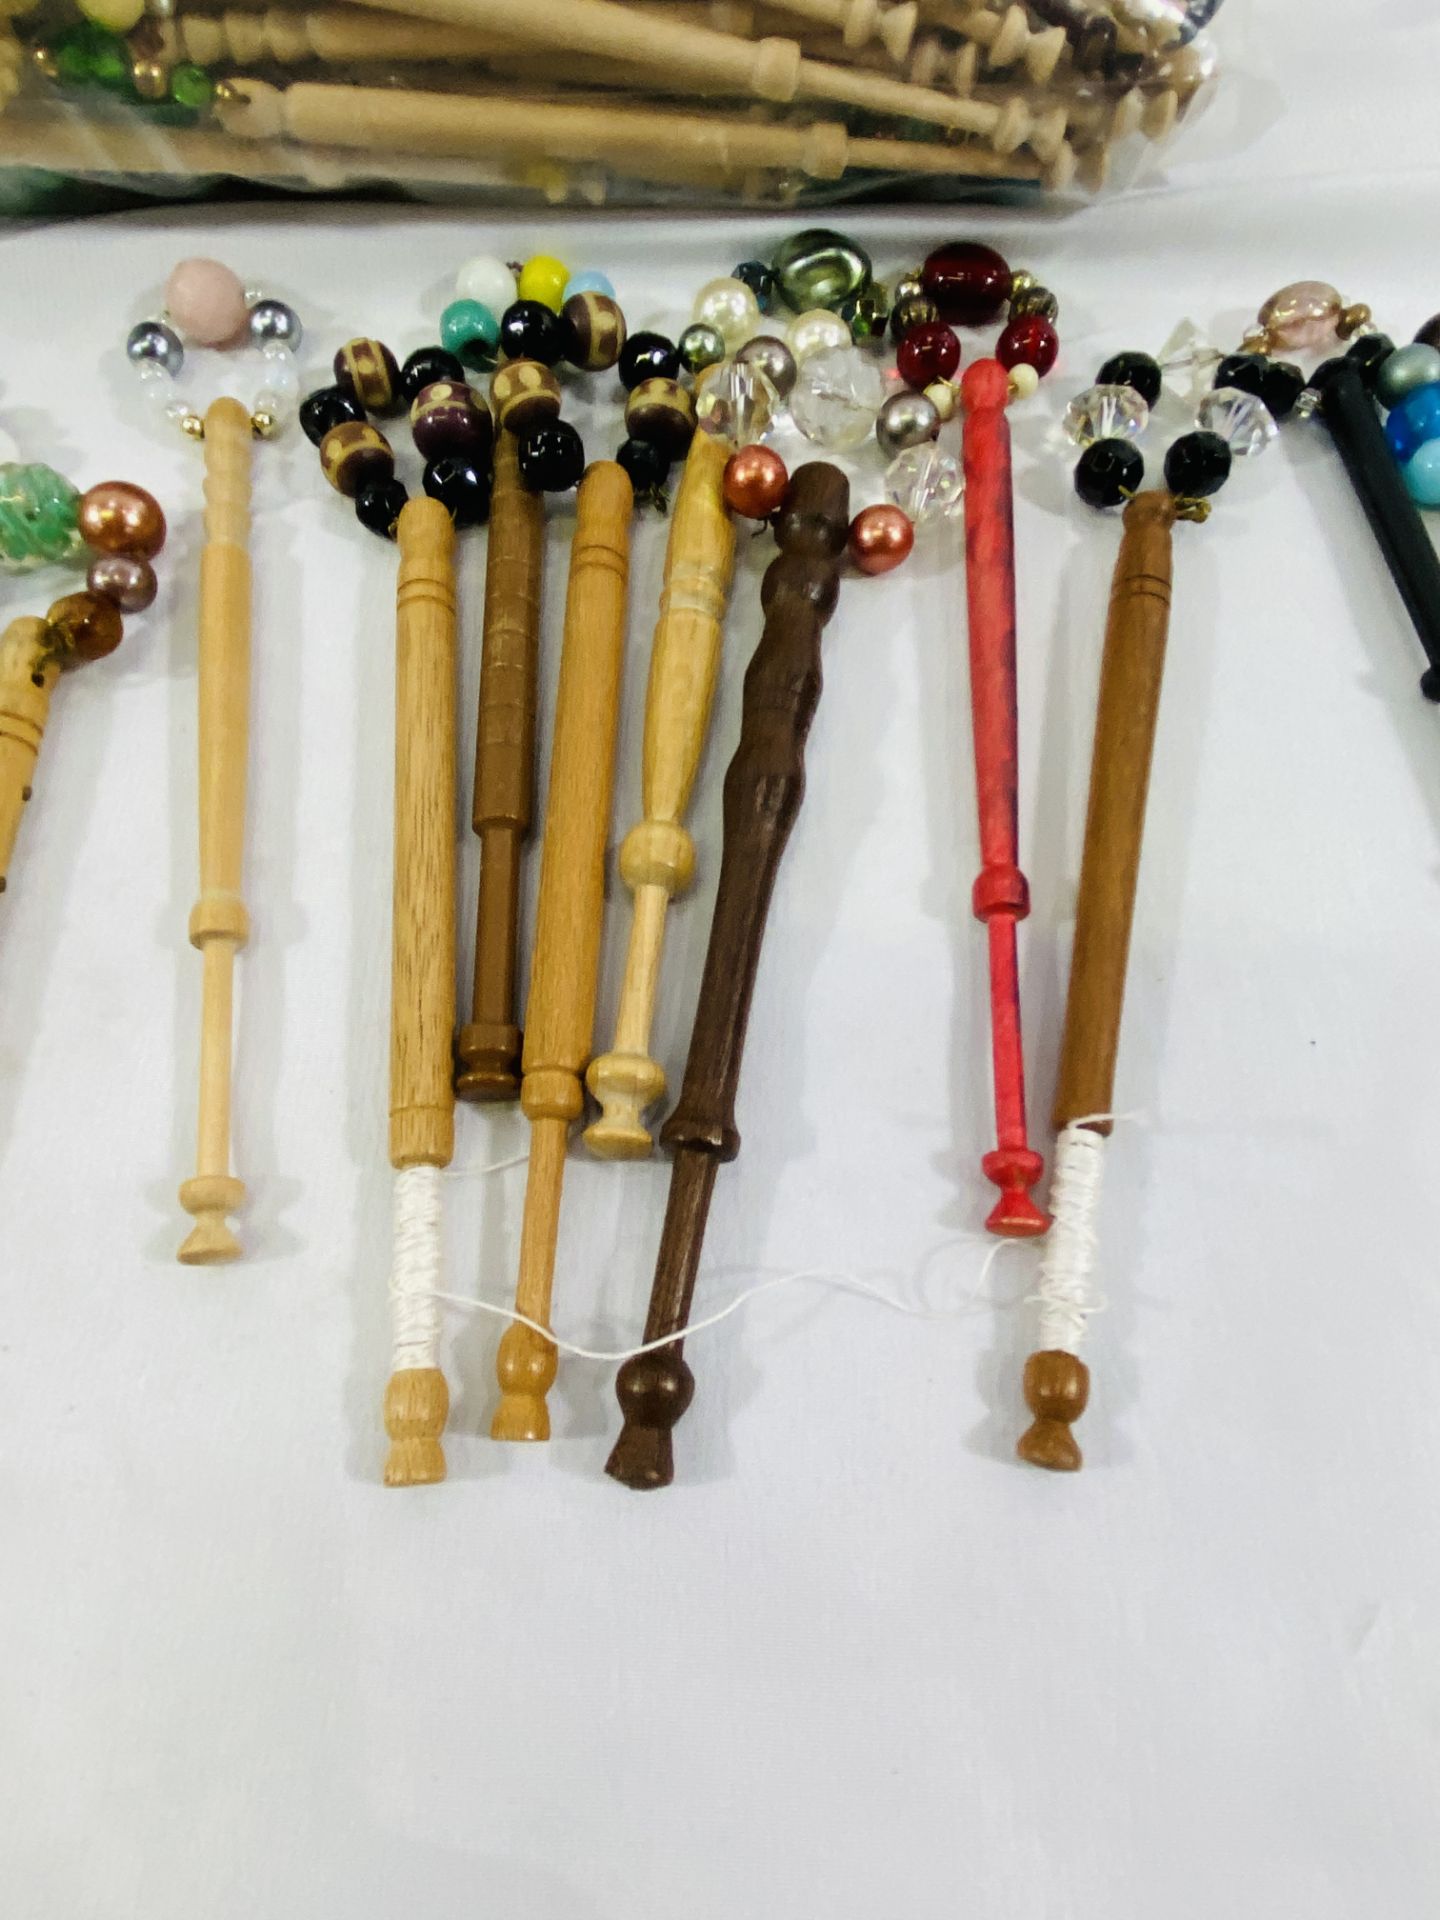 A quantity of lace making bobbins. - Image 3 of 6